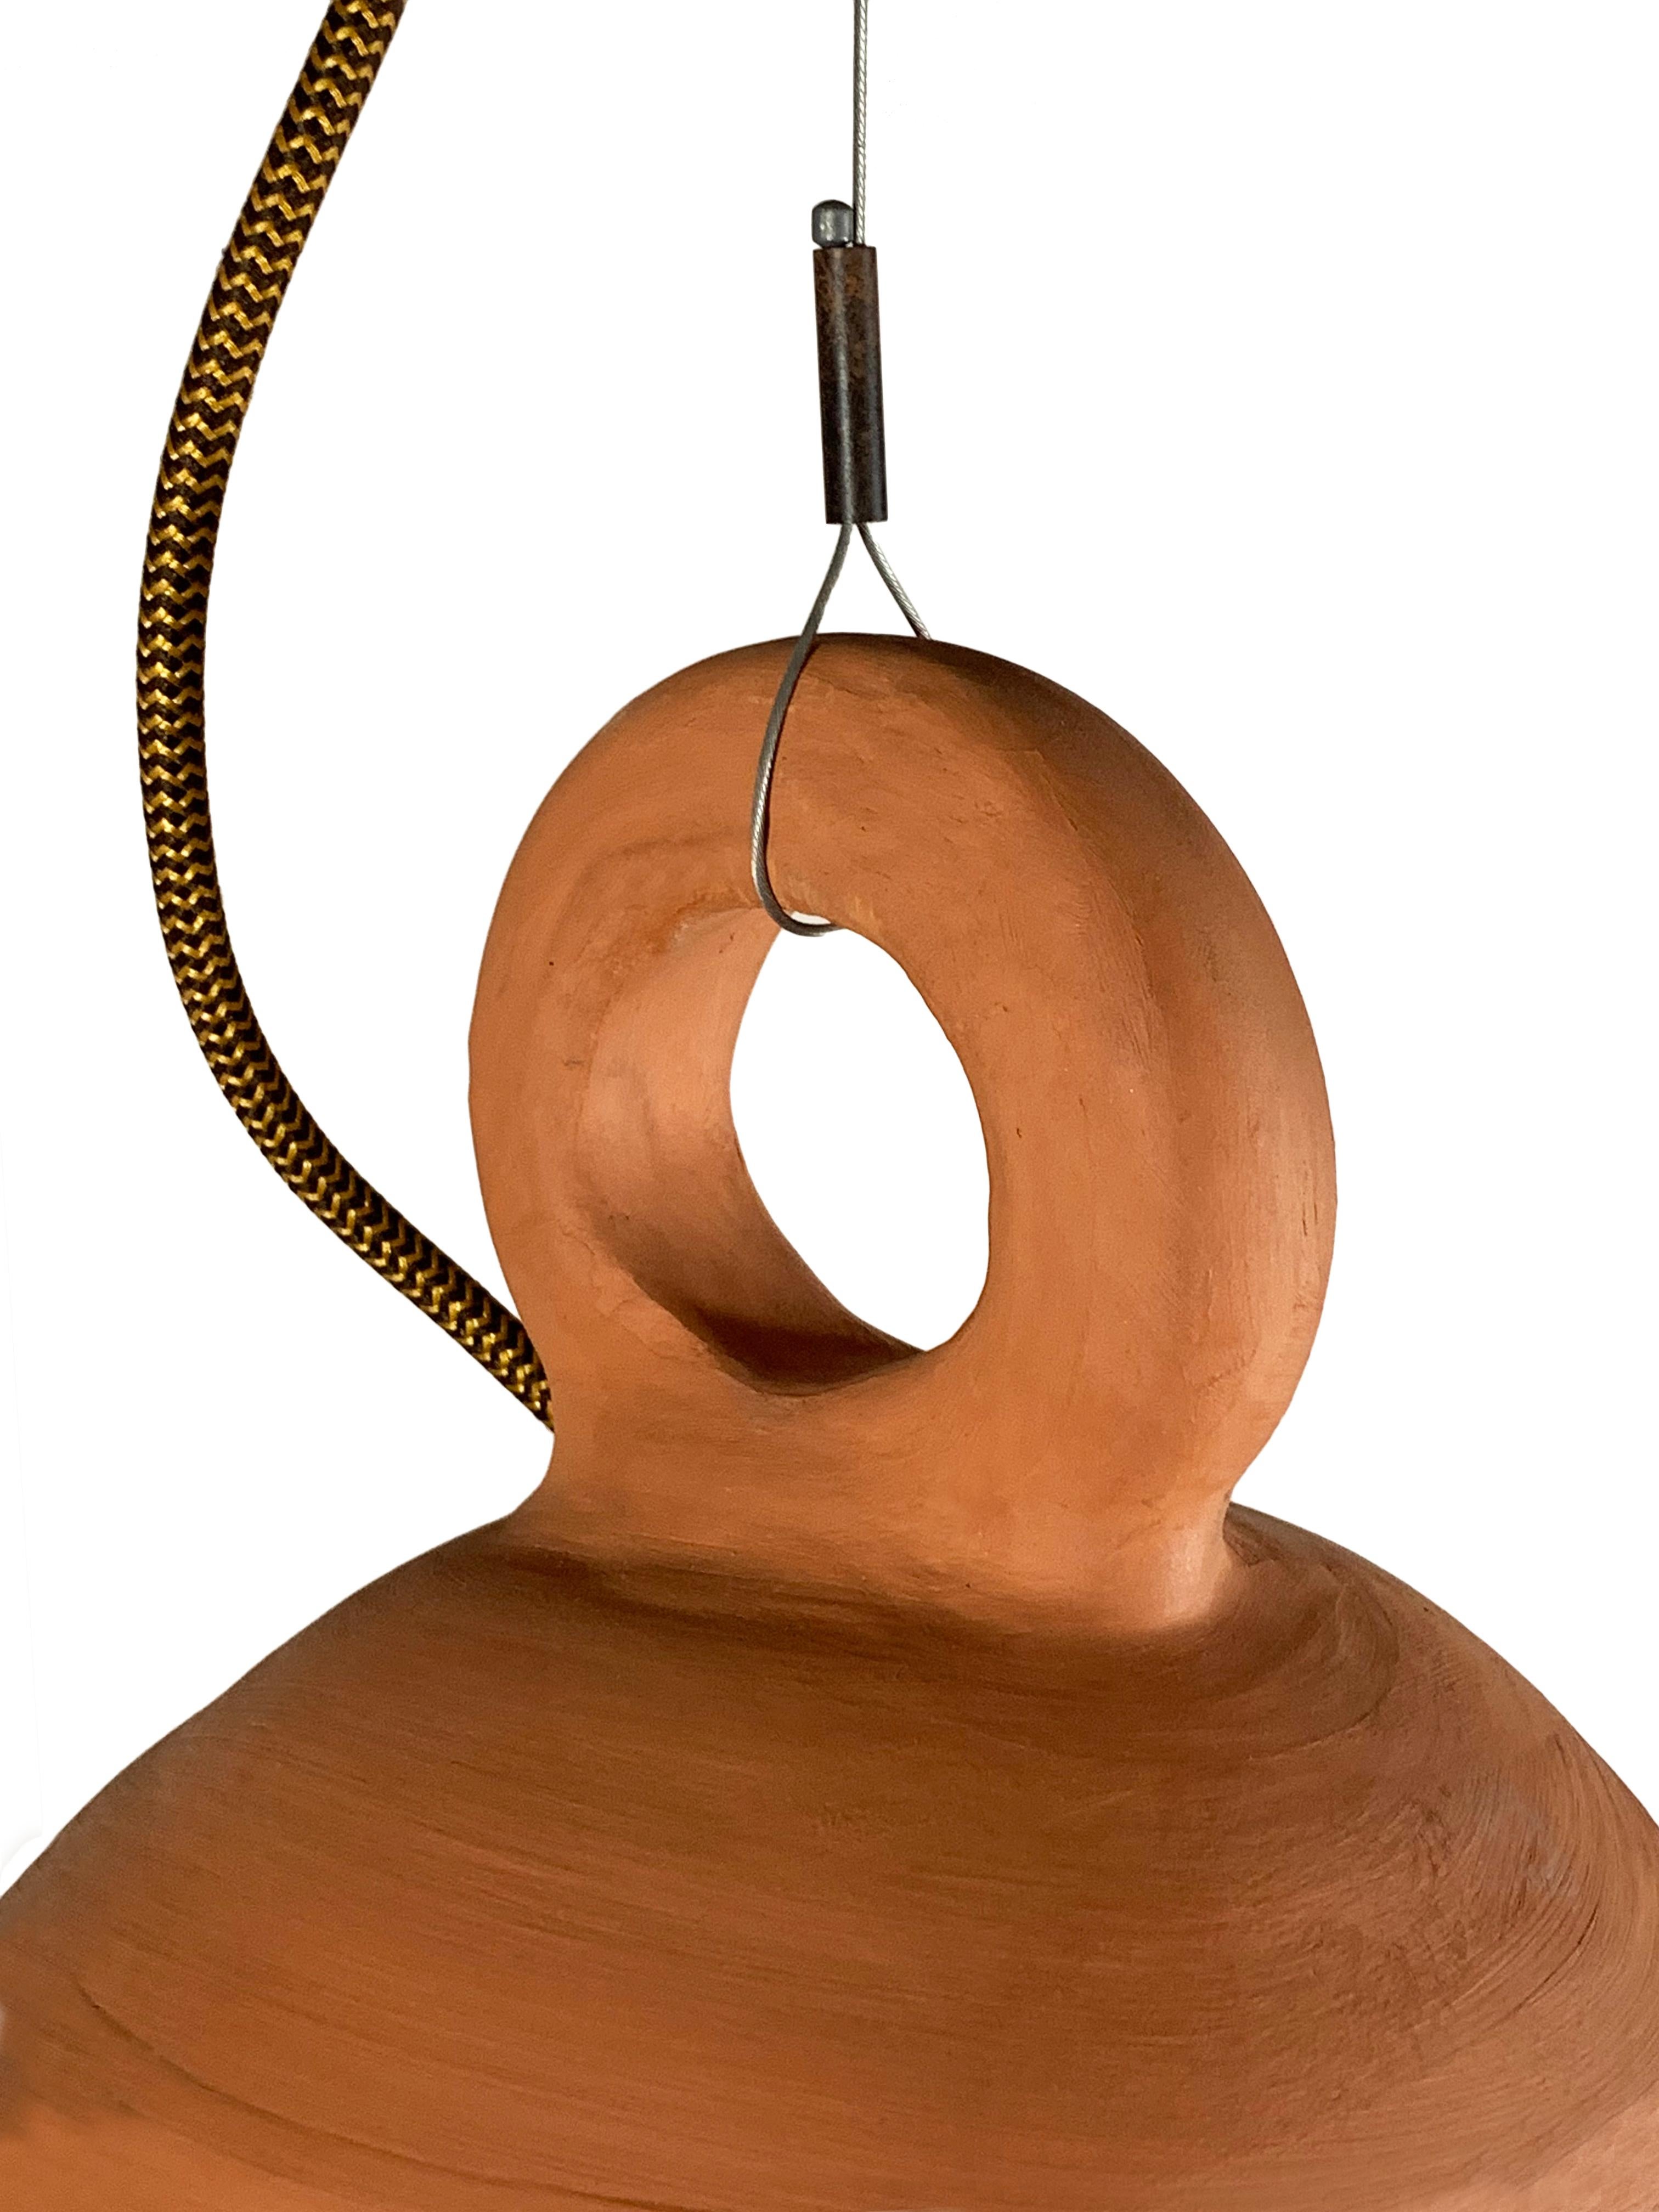 Terracotta pendant, handmade in Ibiza. Suspended by slim, adjustable height stainless steel cable and wired with cloth-covered herringbone electrical cable. Metal ceiling rose with terracotta paint finish. E27 bulb holder.
Light bulb casts a warm